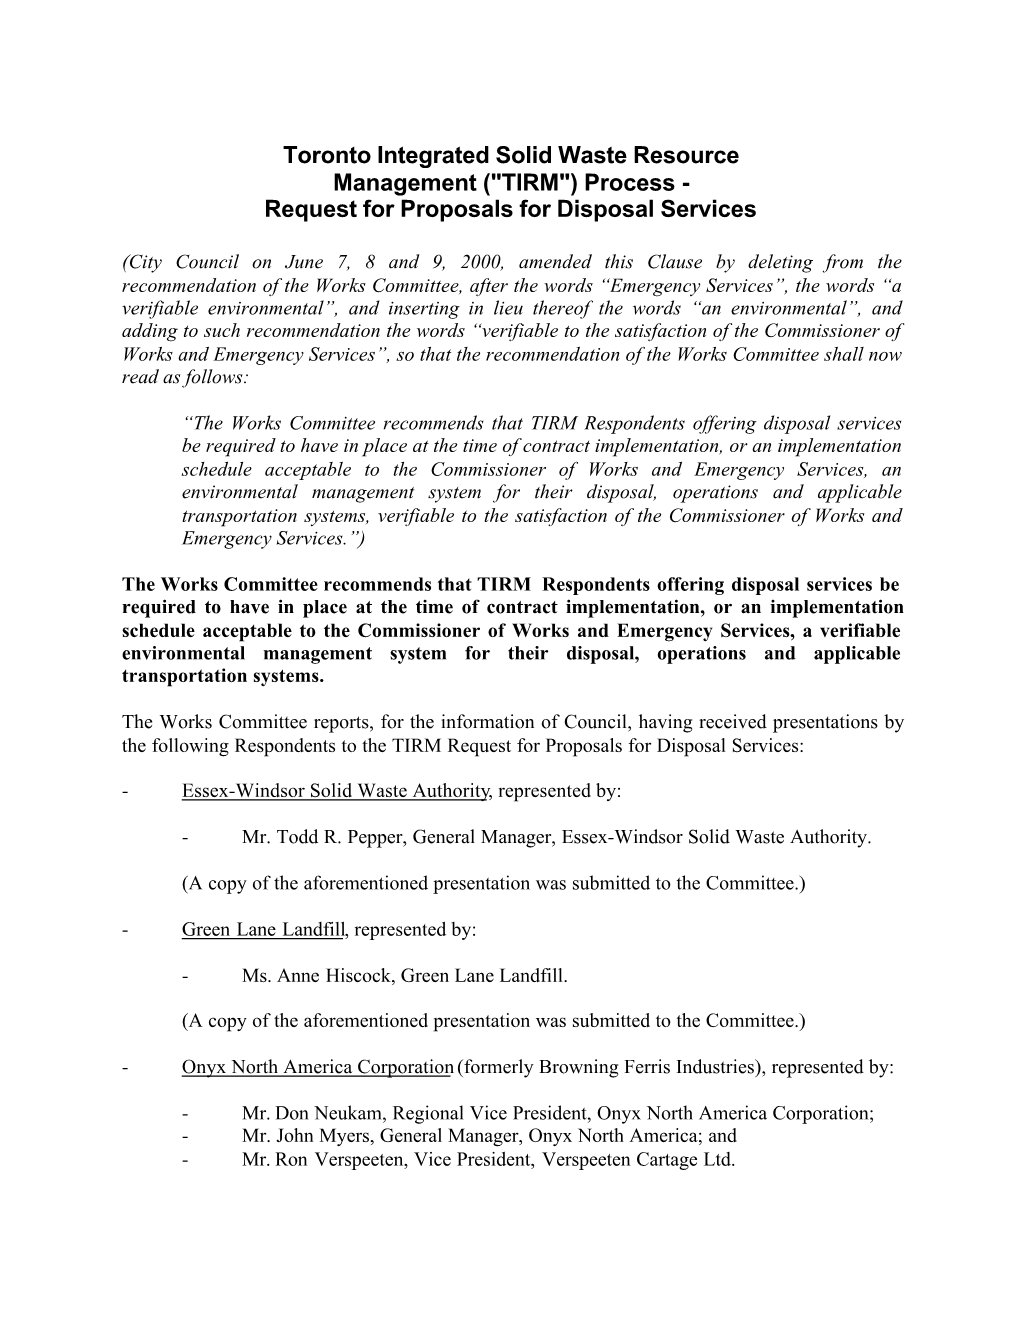 Toronto Integrated Solid Waste Resource Management ("TIRM") Process - Request for Proposals for Disposal Services